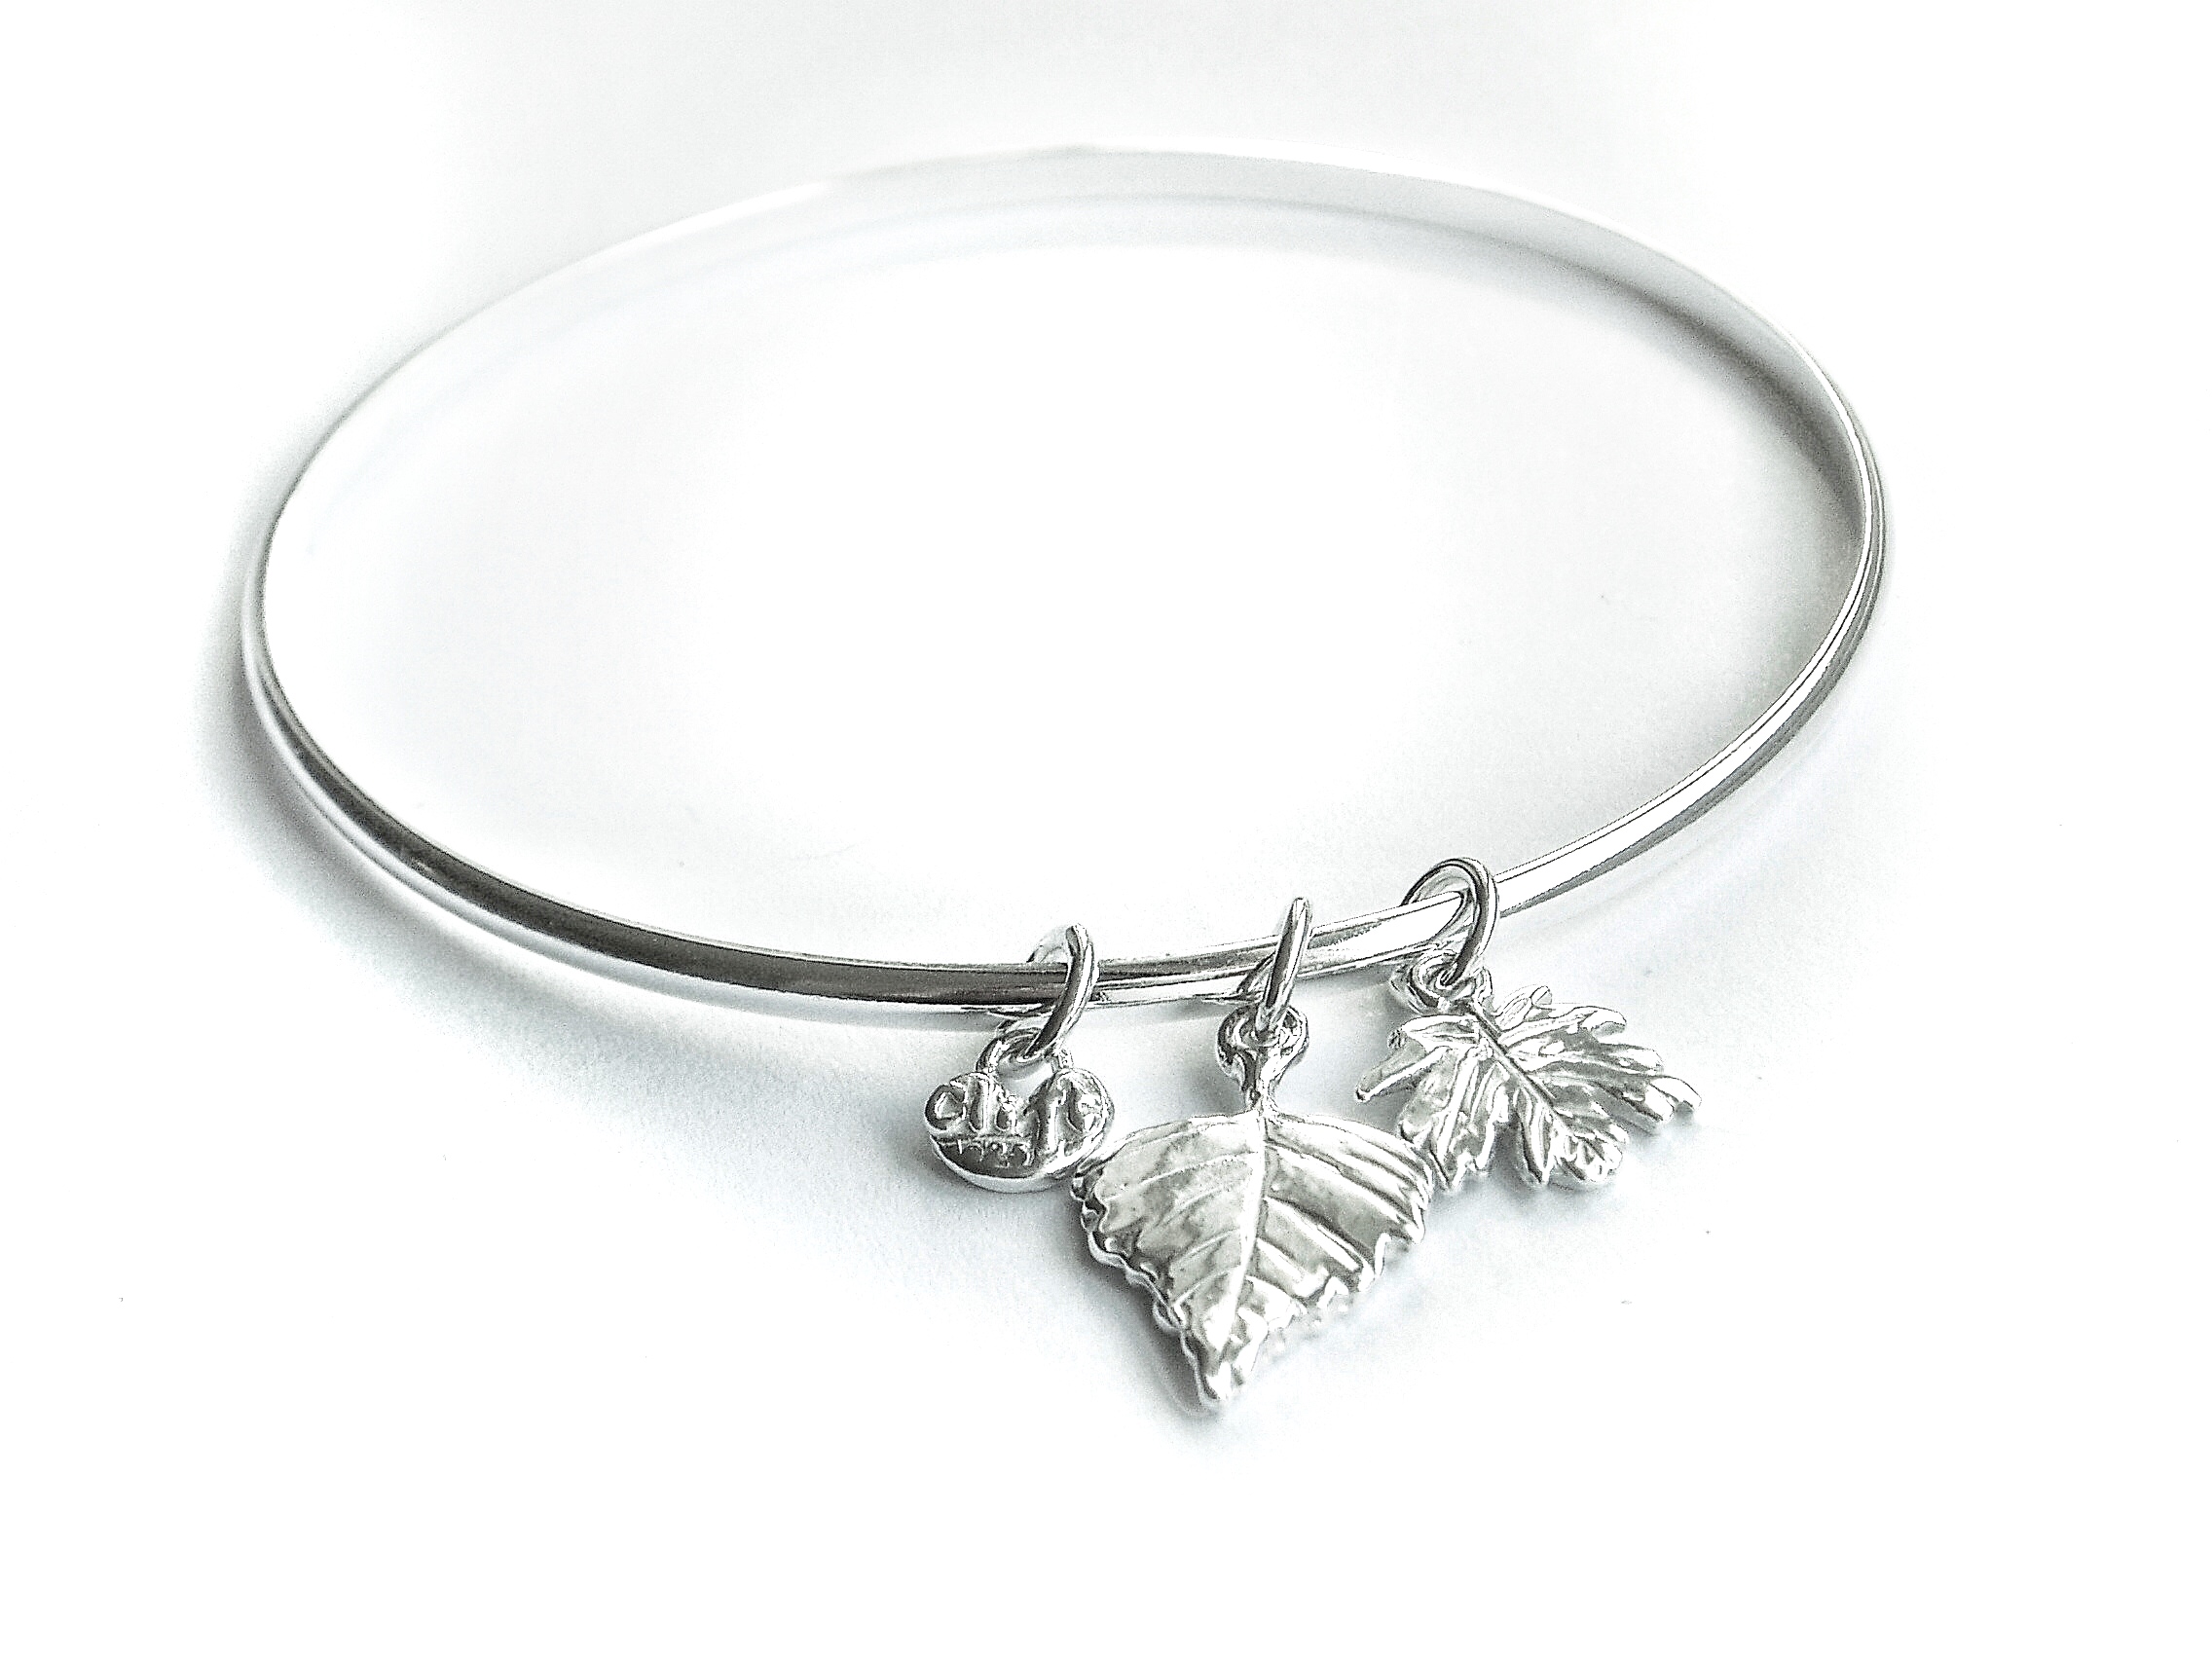 Handmade silver bangle with two leaves - Carol Clift Jewellery